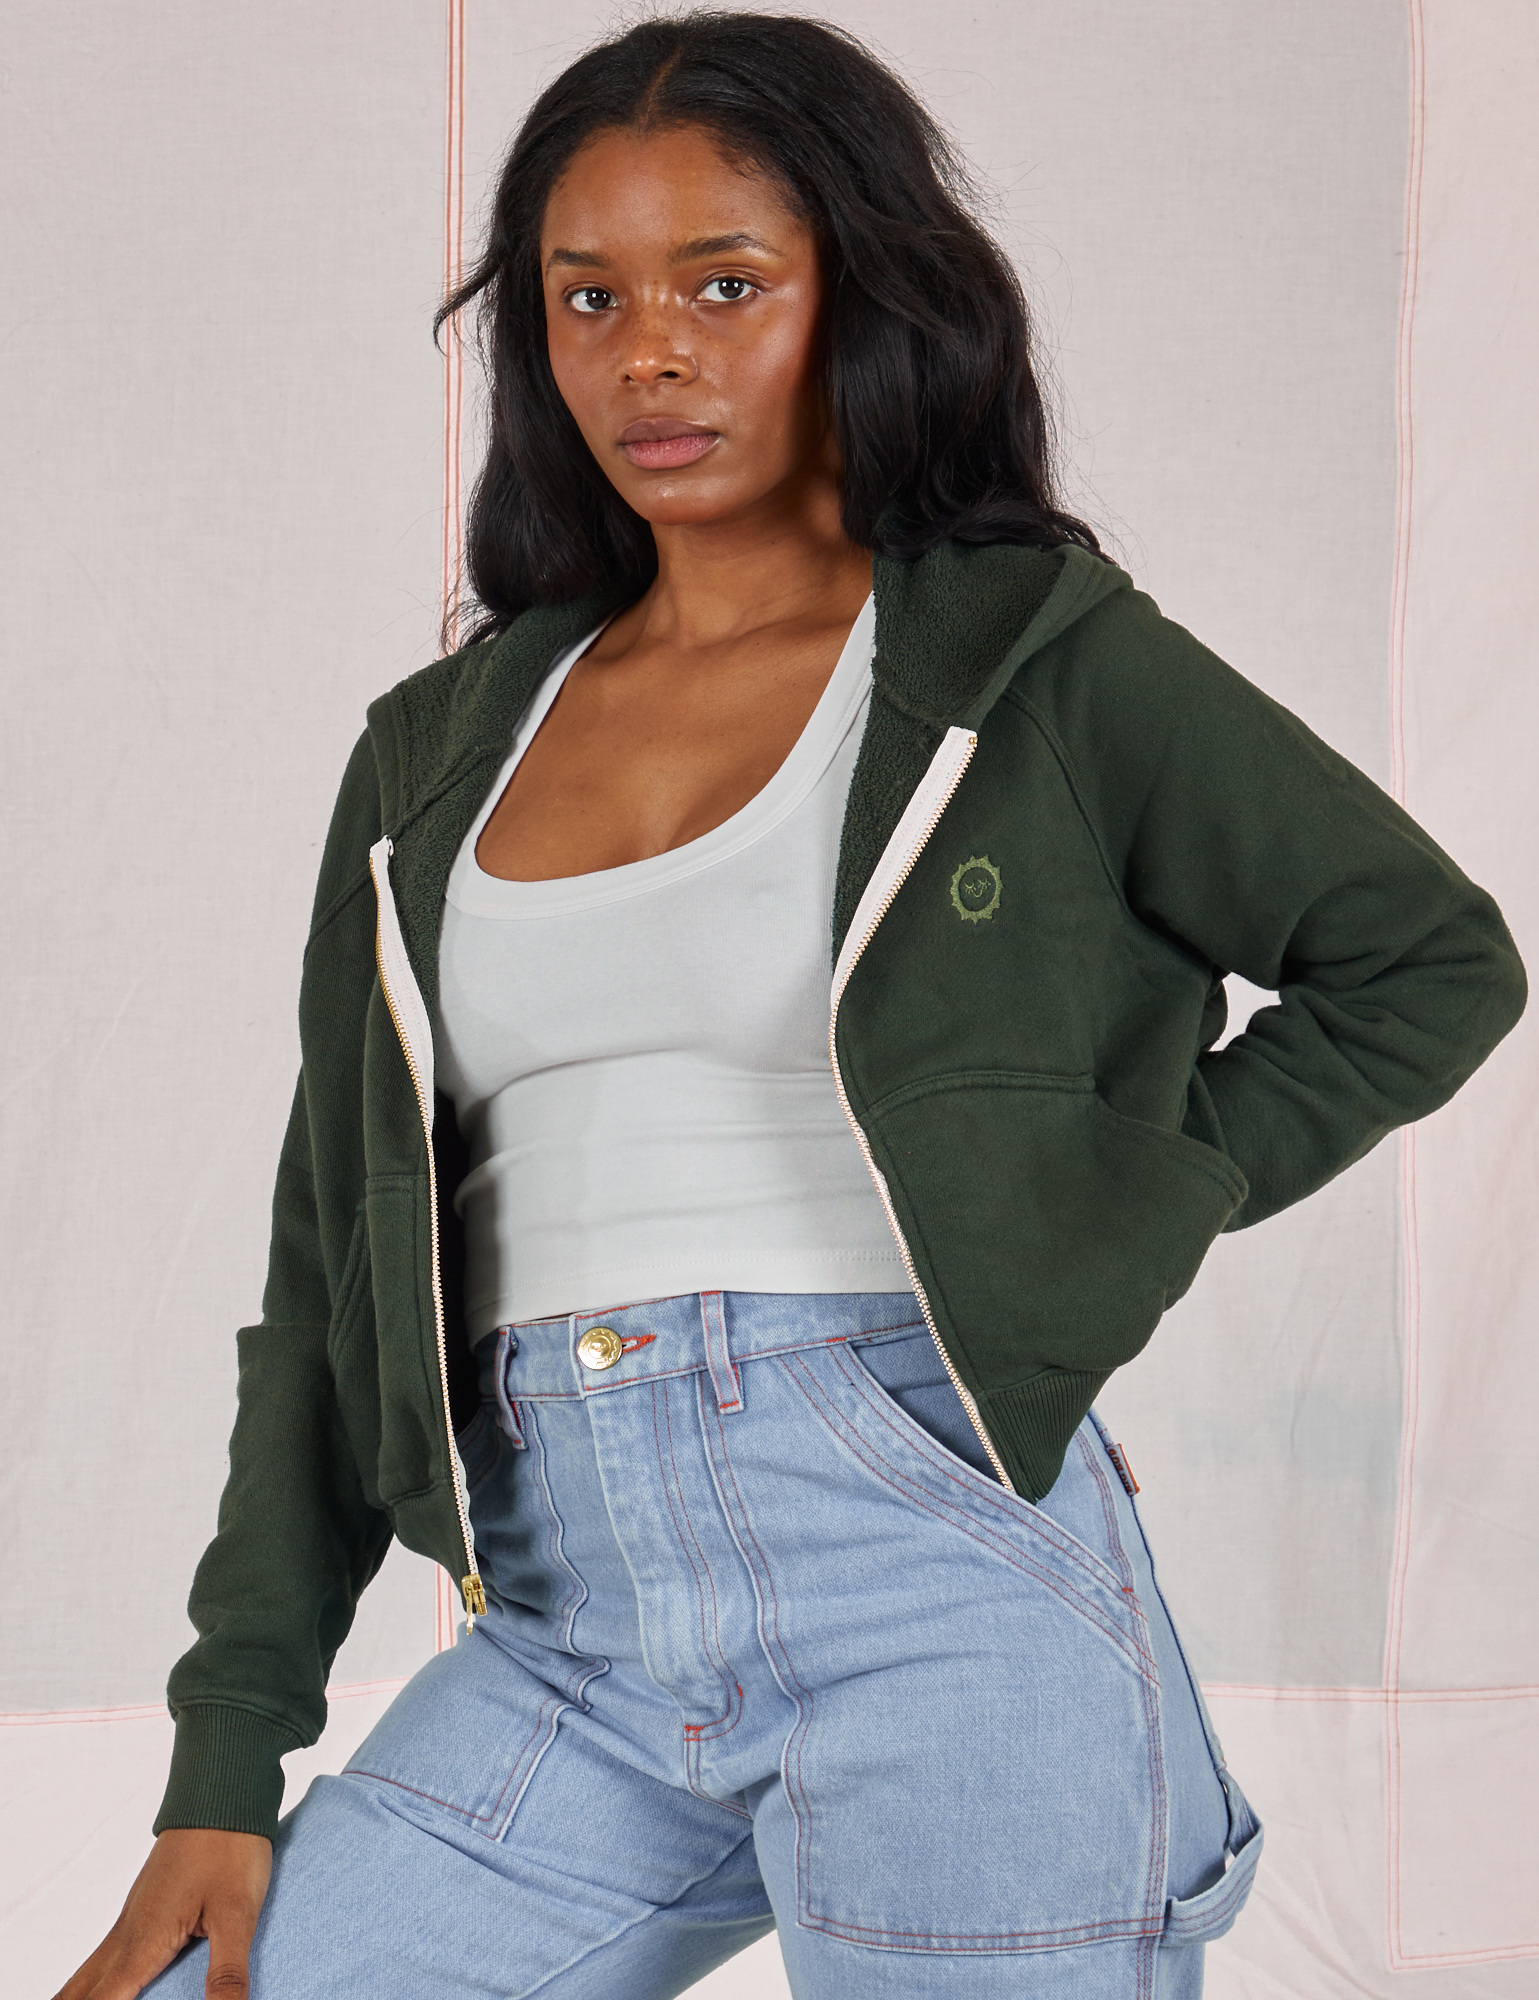 Kandia is 5'3" and wearing P Cropped Zip Hoodie in Swamp Green paired with a vintage off-white Cropped Tank underneath and light wash Carpenter Jeans